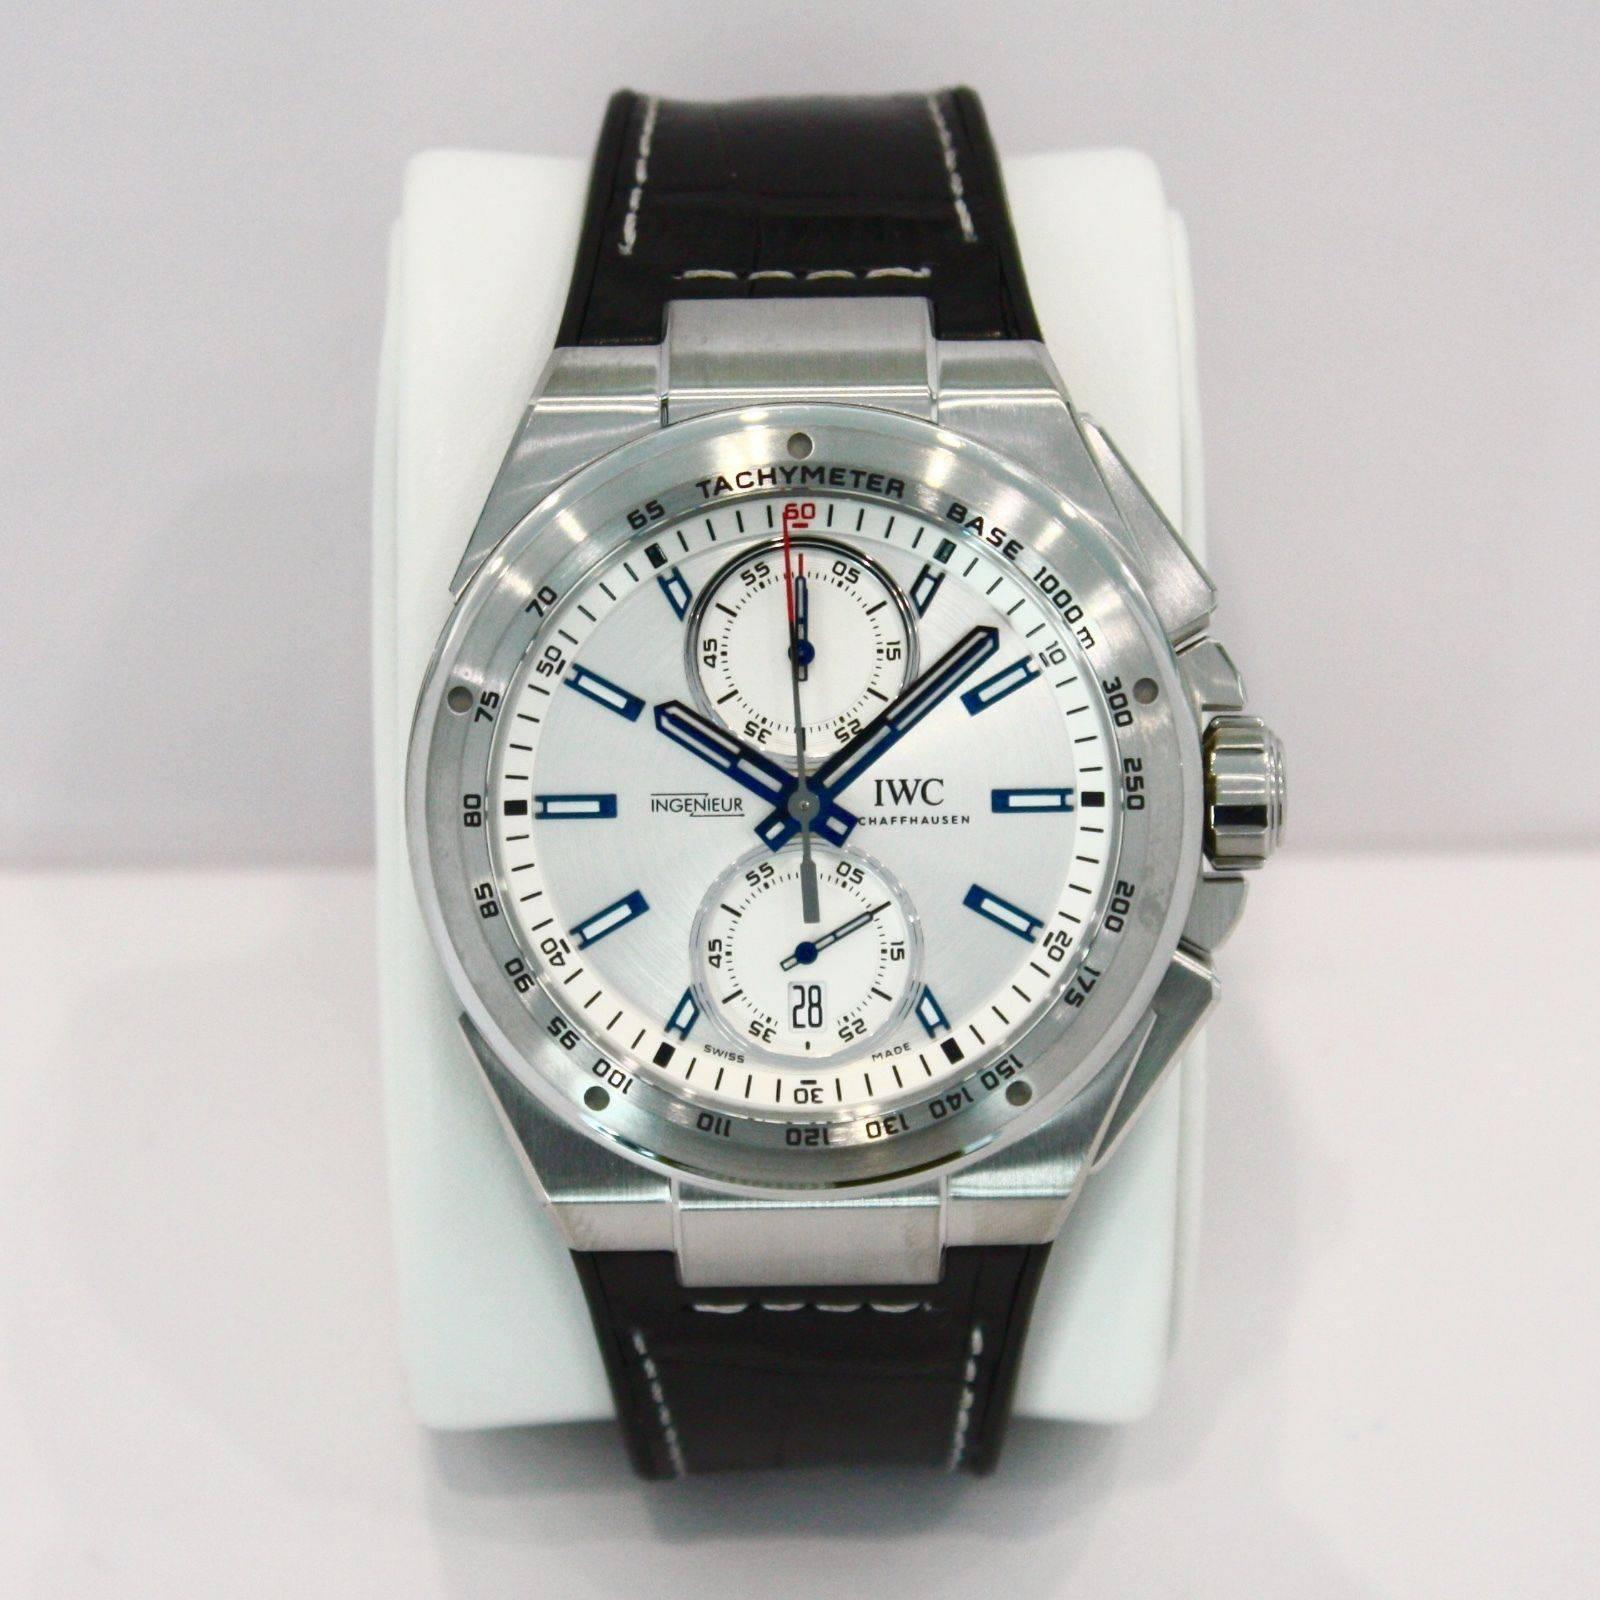 IWC Ingenieur Stainless Steel Chronograph Racer Automatic Wristwatch 4